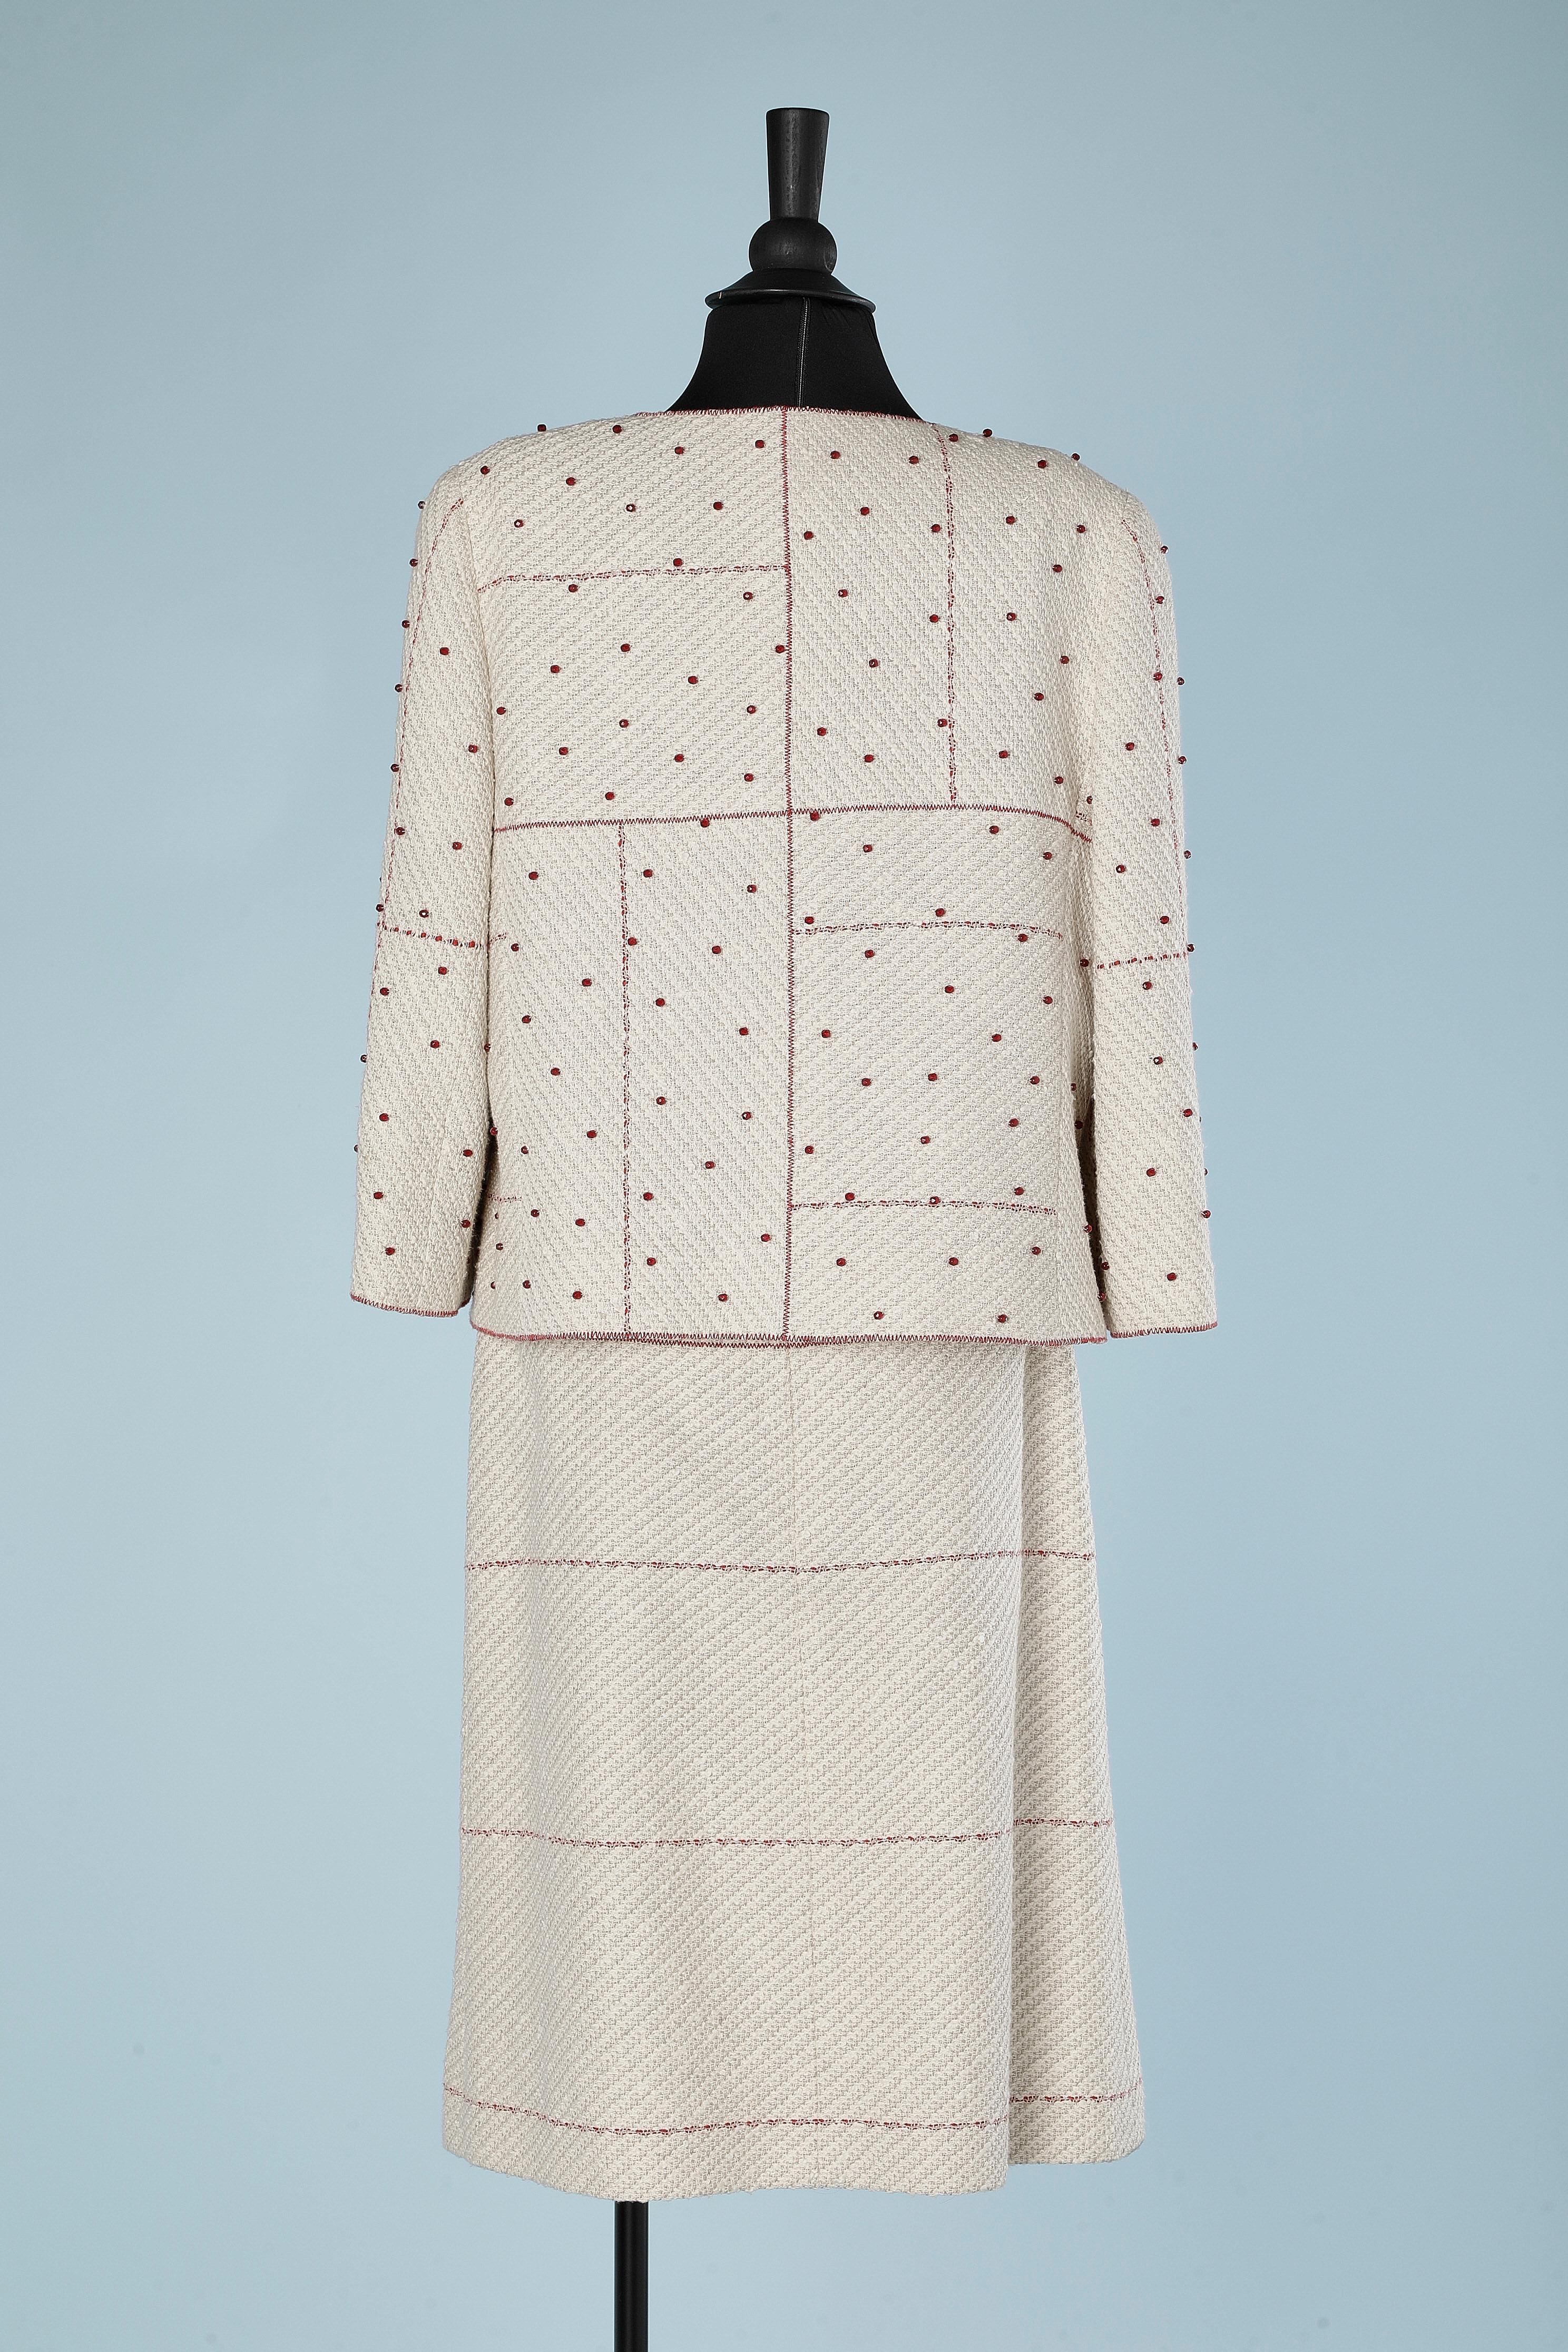 Beige 3 pieces ensemble in off-white cotton and wool tweed with red beads Chanel 